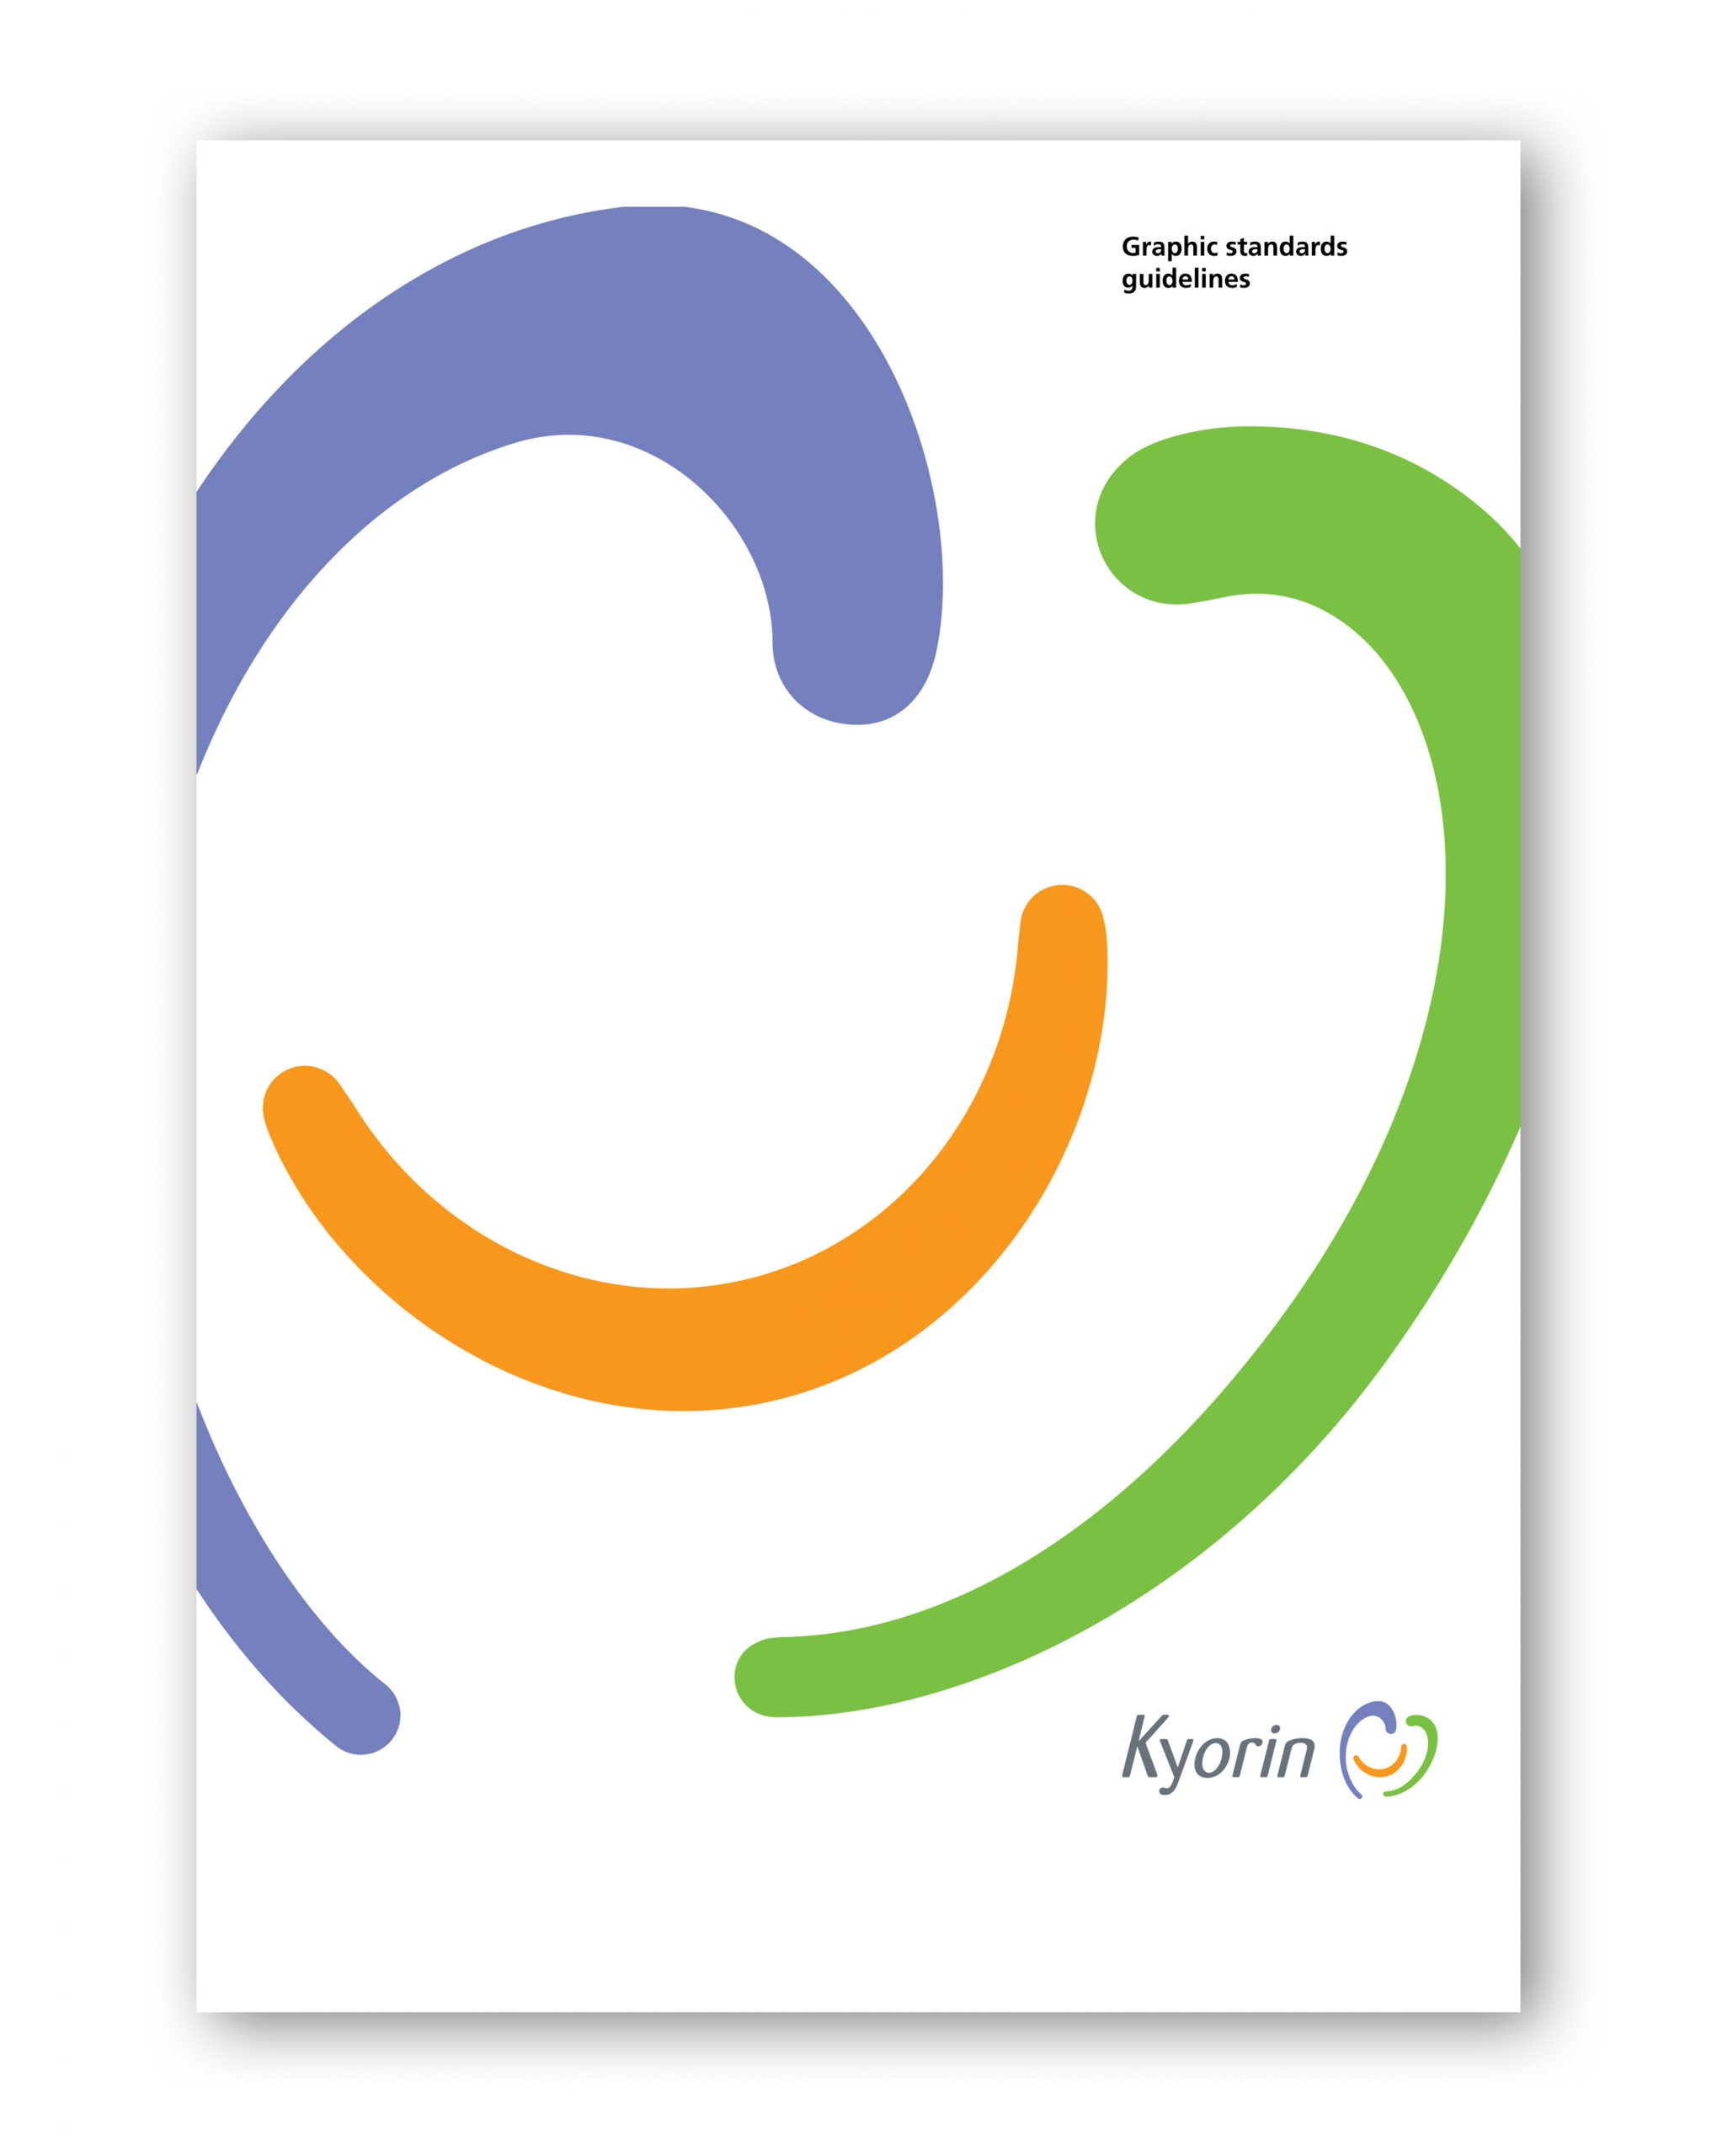 Project image 2 for Identity, Kyorin Pharmaceutical Co.